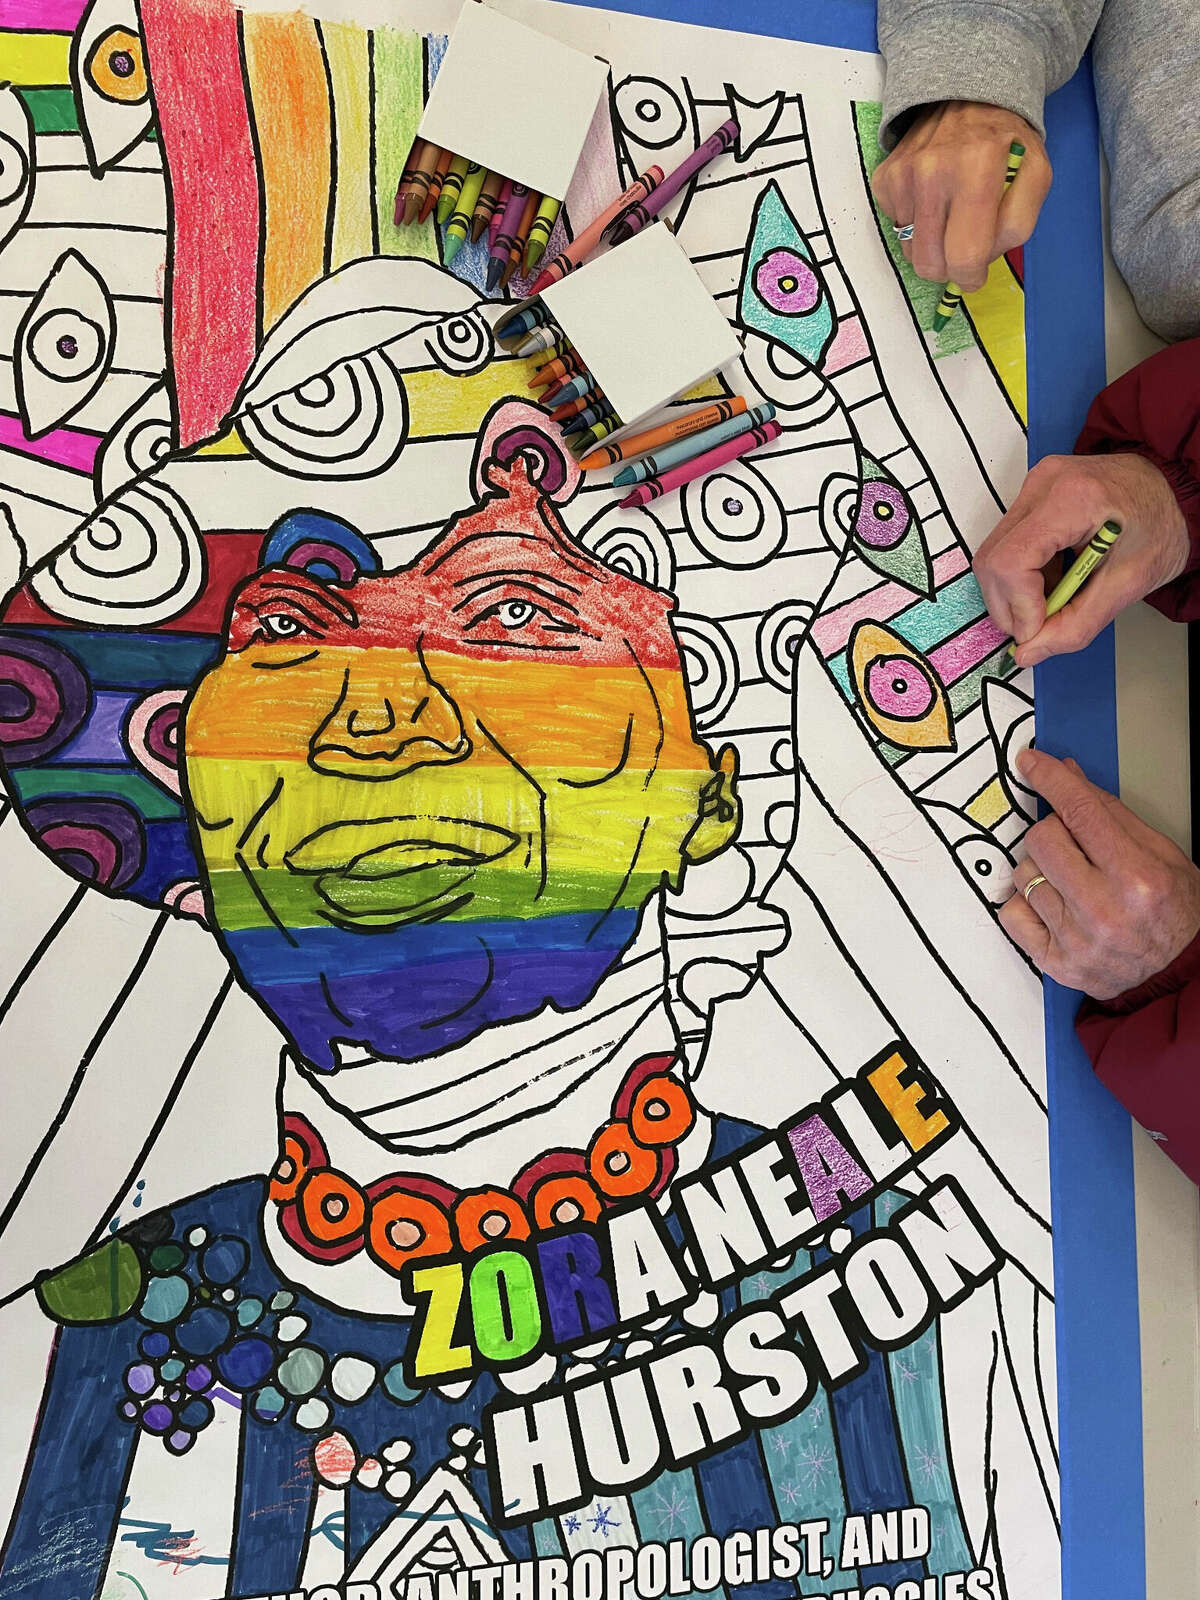 Coloring is in process on the portrait of Zora Neal Hurston for The Great Americans Project at the Willoughby Wallace Memorial Library.